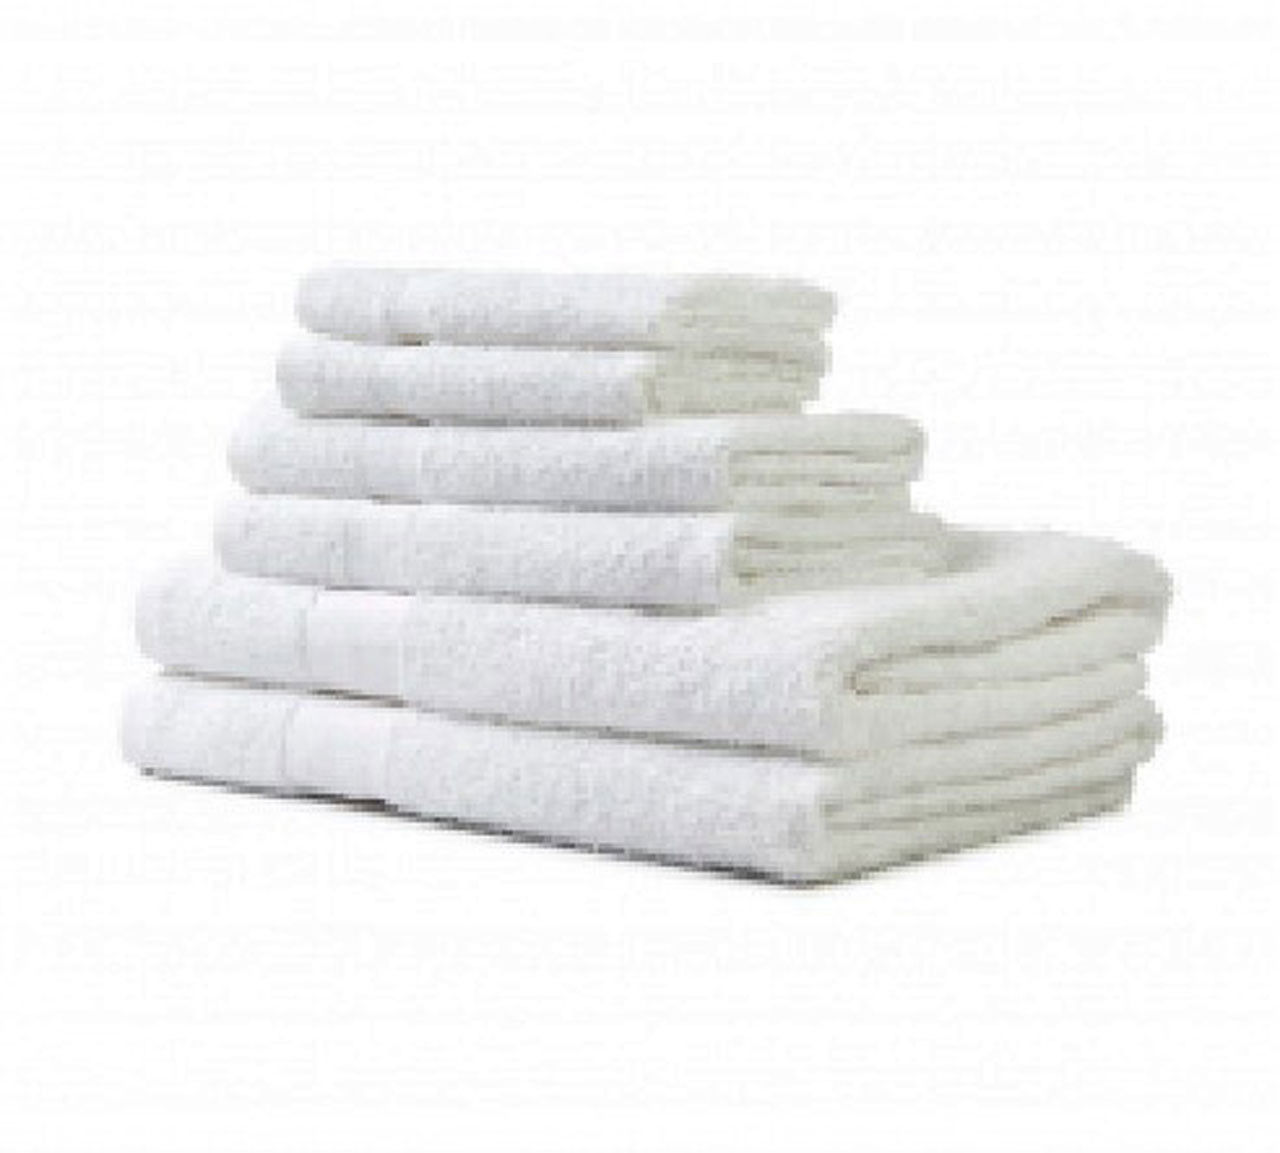 What's the care instruction for jewel wholesale bath towels to maintain quality?